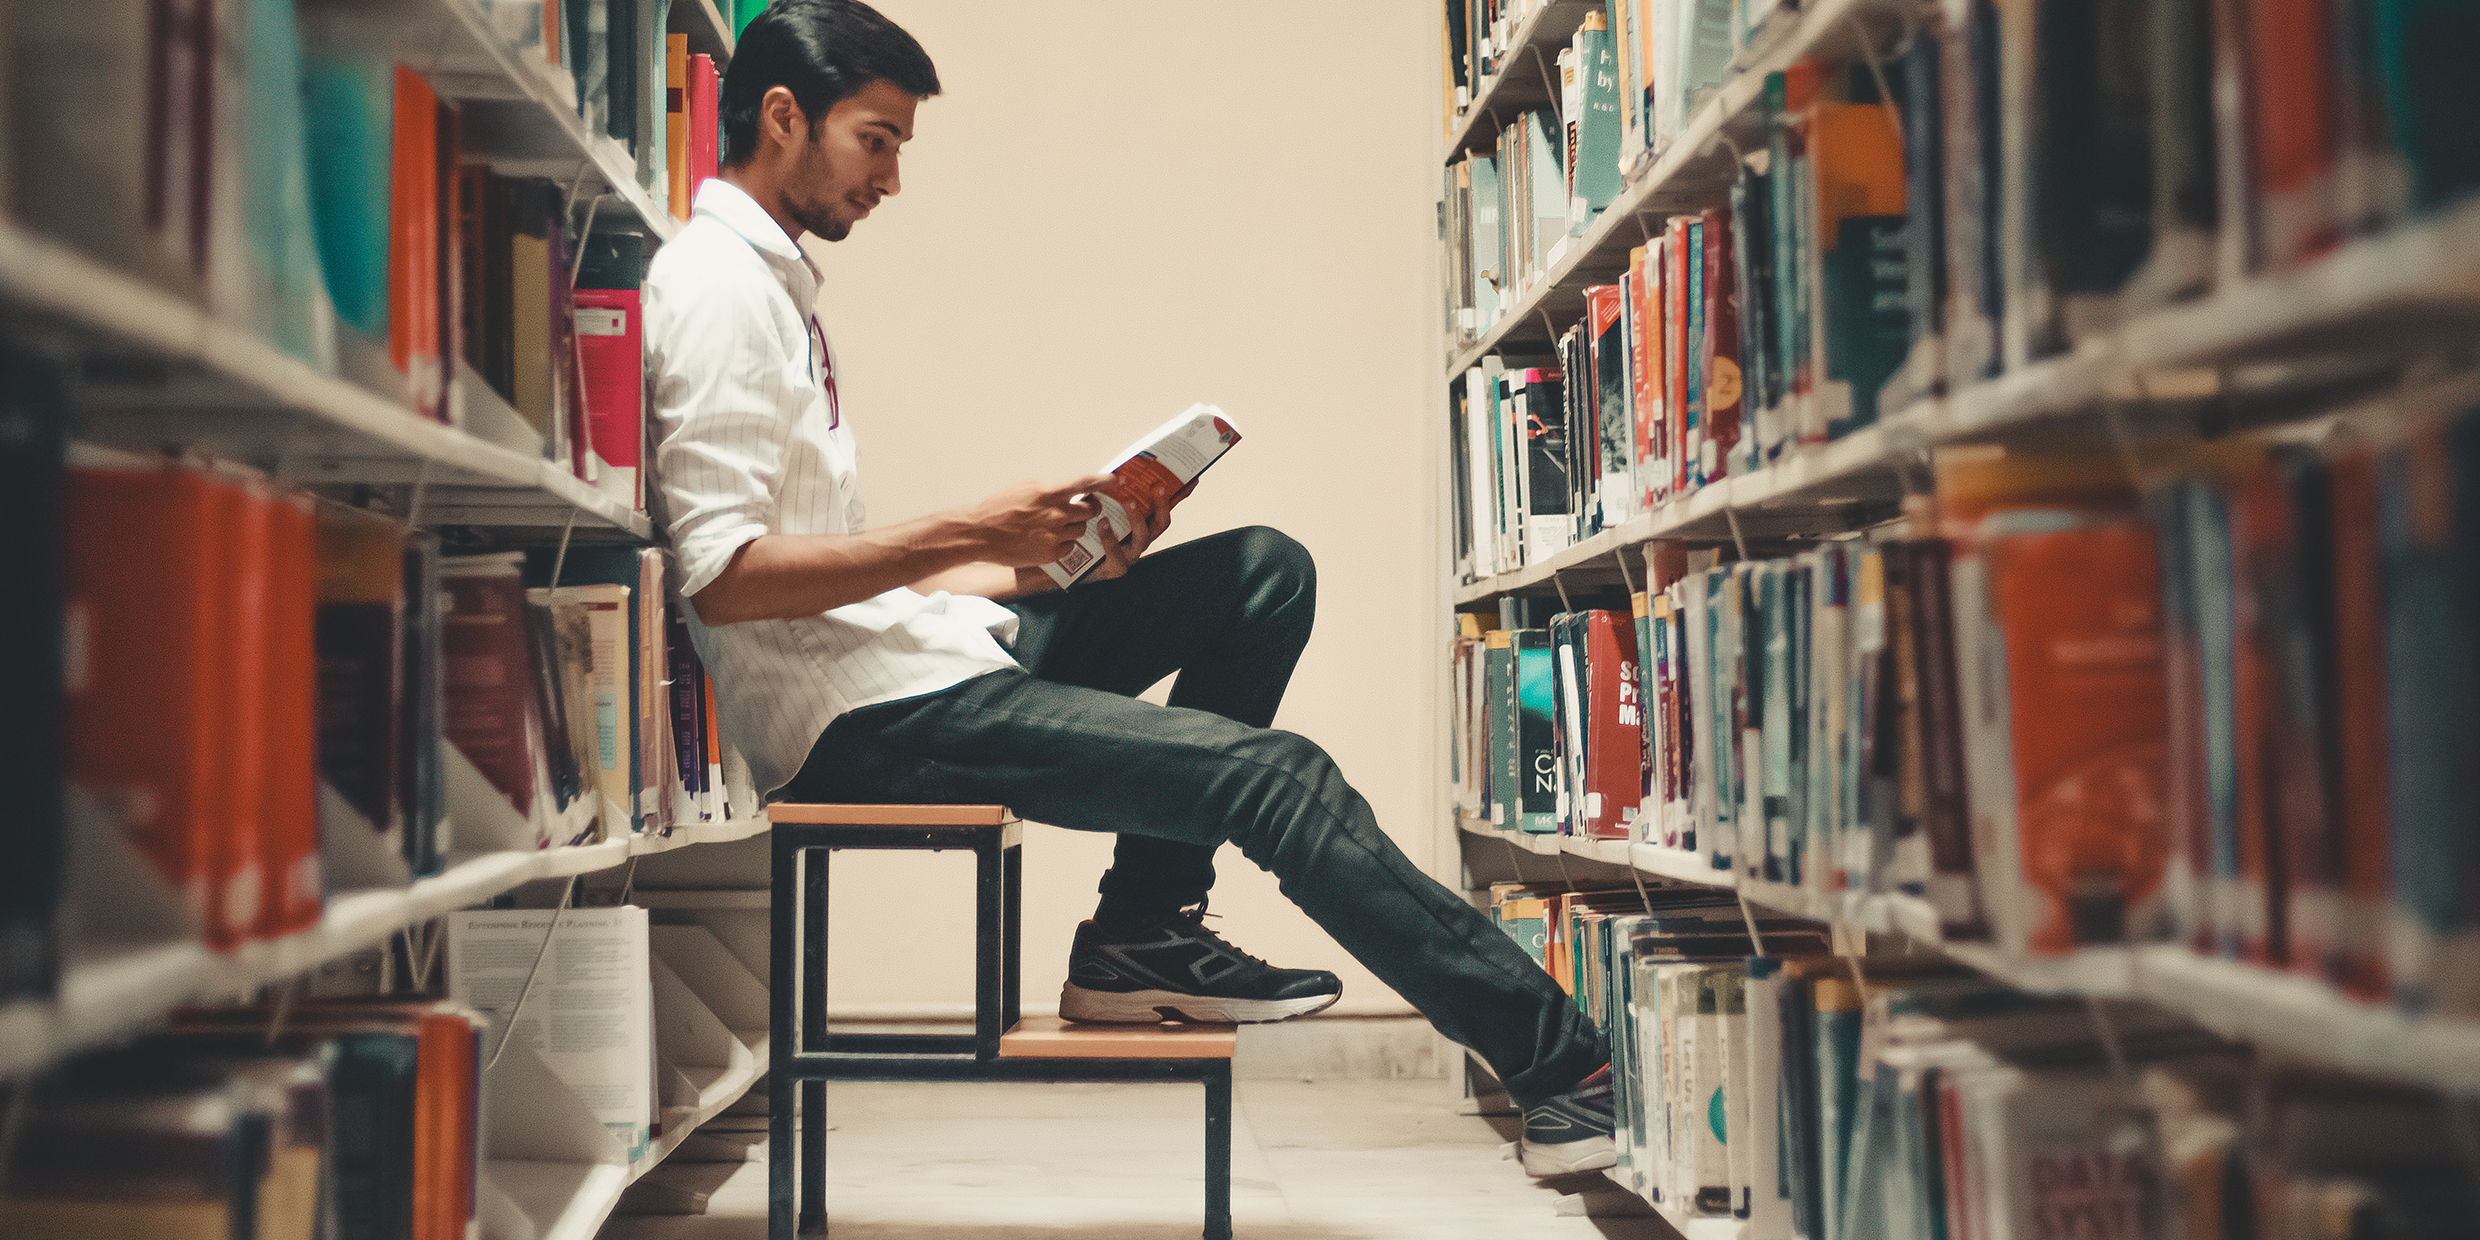 Image of a young man reading a book inside a library